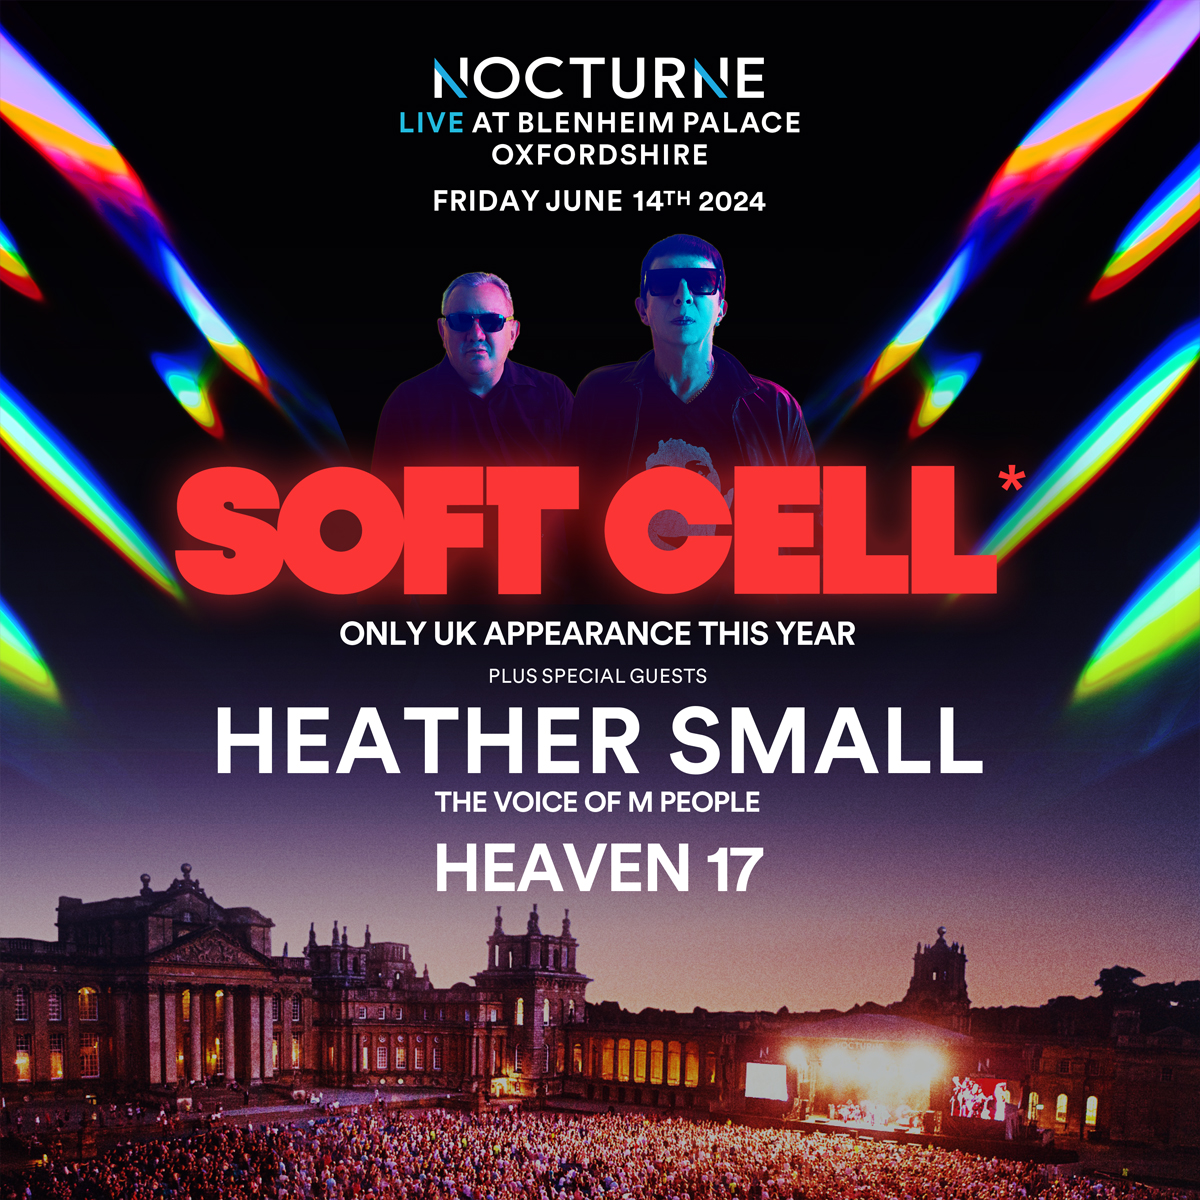 Our ONLY UK APPEARANCE FOR 2024 will take place at Blenheim Palace in Oxfordshire on June 14th and we will be joined by Heather Small and Heaven 17. ❤️ Tickets go on sale on Thursday. Sign up for the presale here: nocturnelive.com